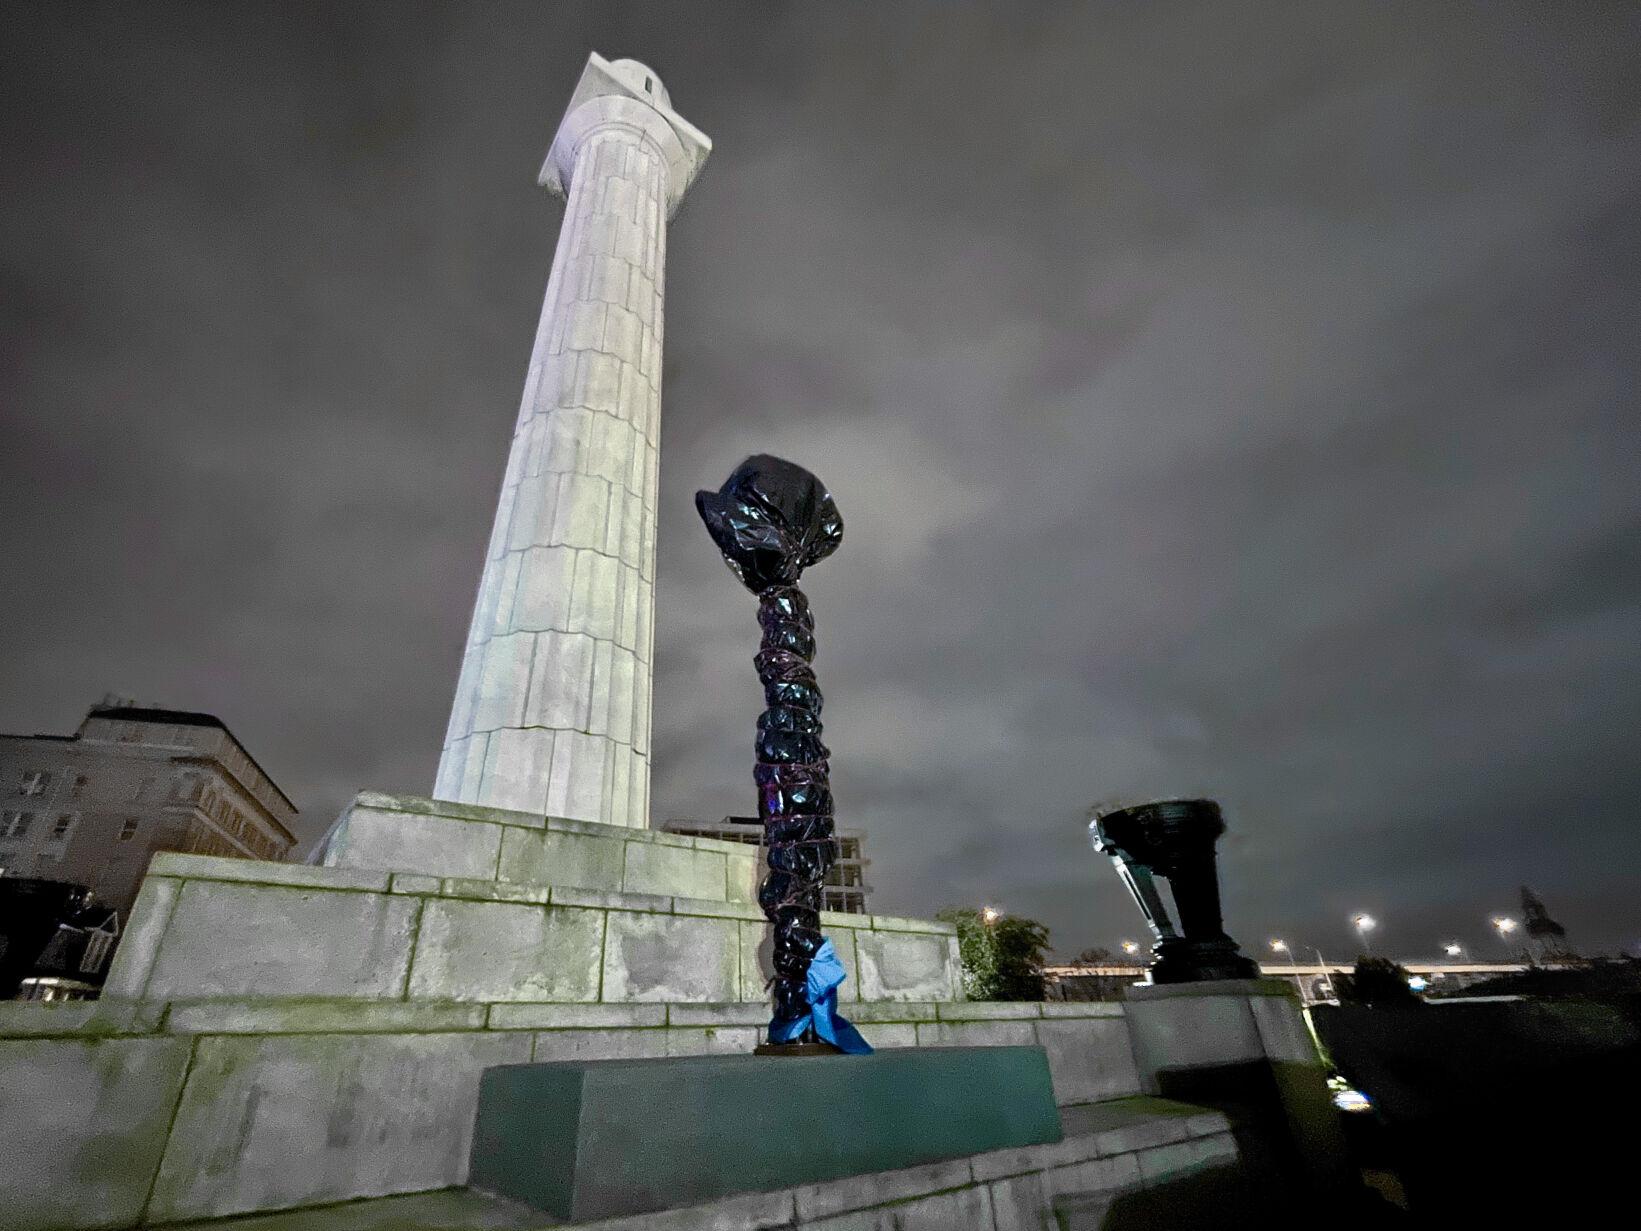 There's a mysterious wrapped object at the former Lee Circle in New Orleans.  What is it? | News 